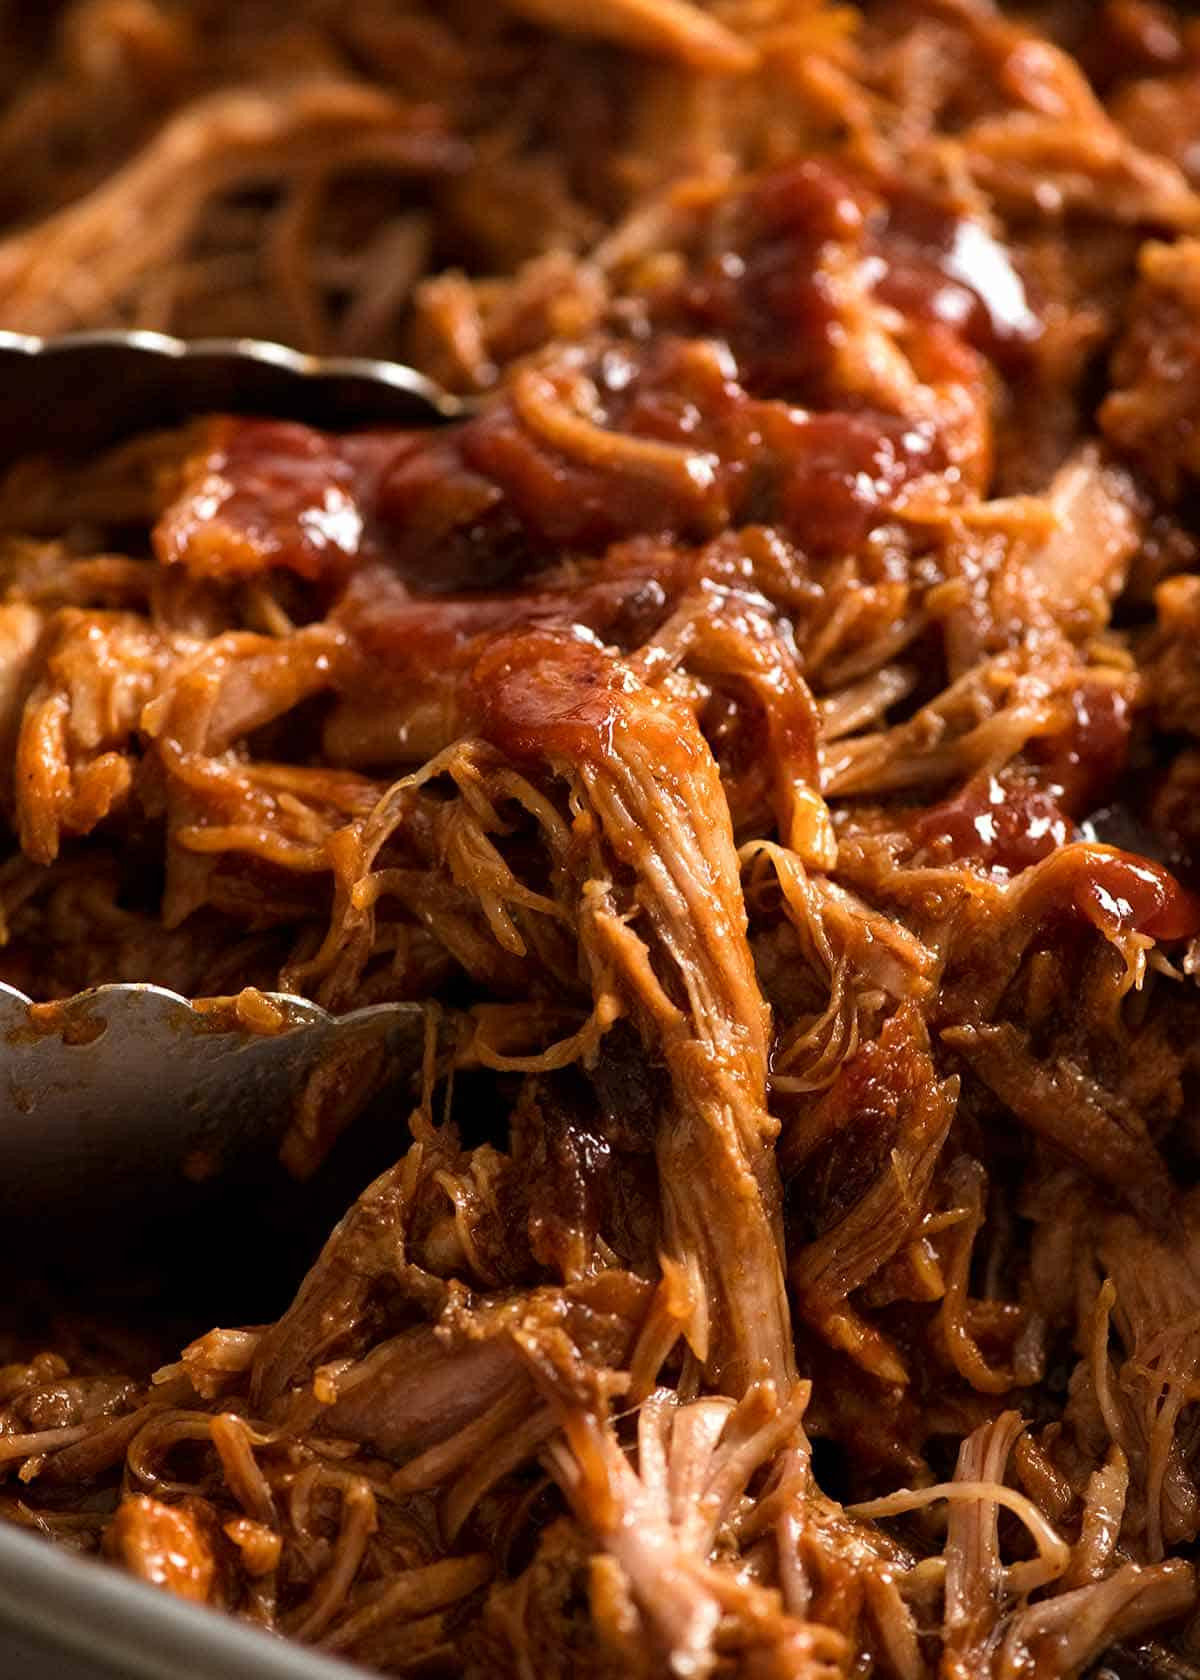 Homemade Bbq Sauce For Pulled Pork
 Pulled Pork with BBQ Sauce